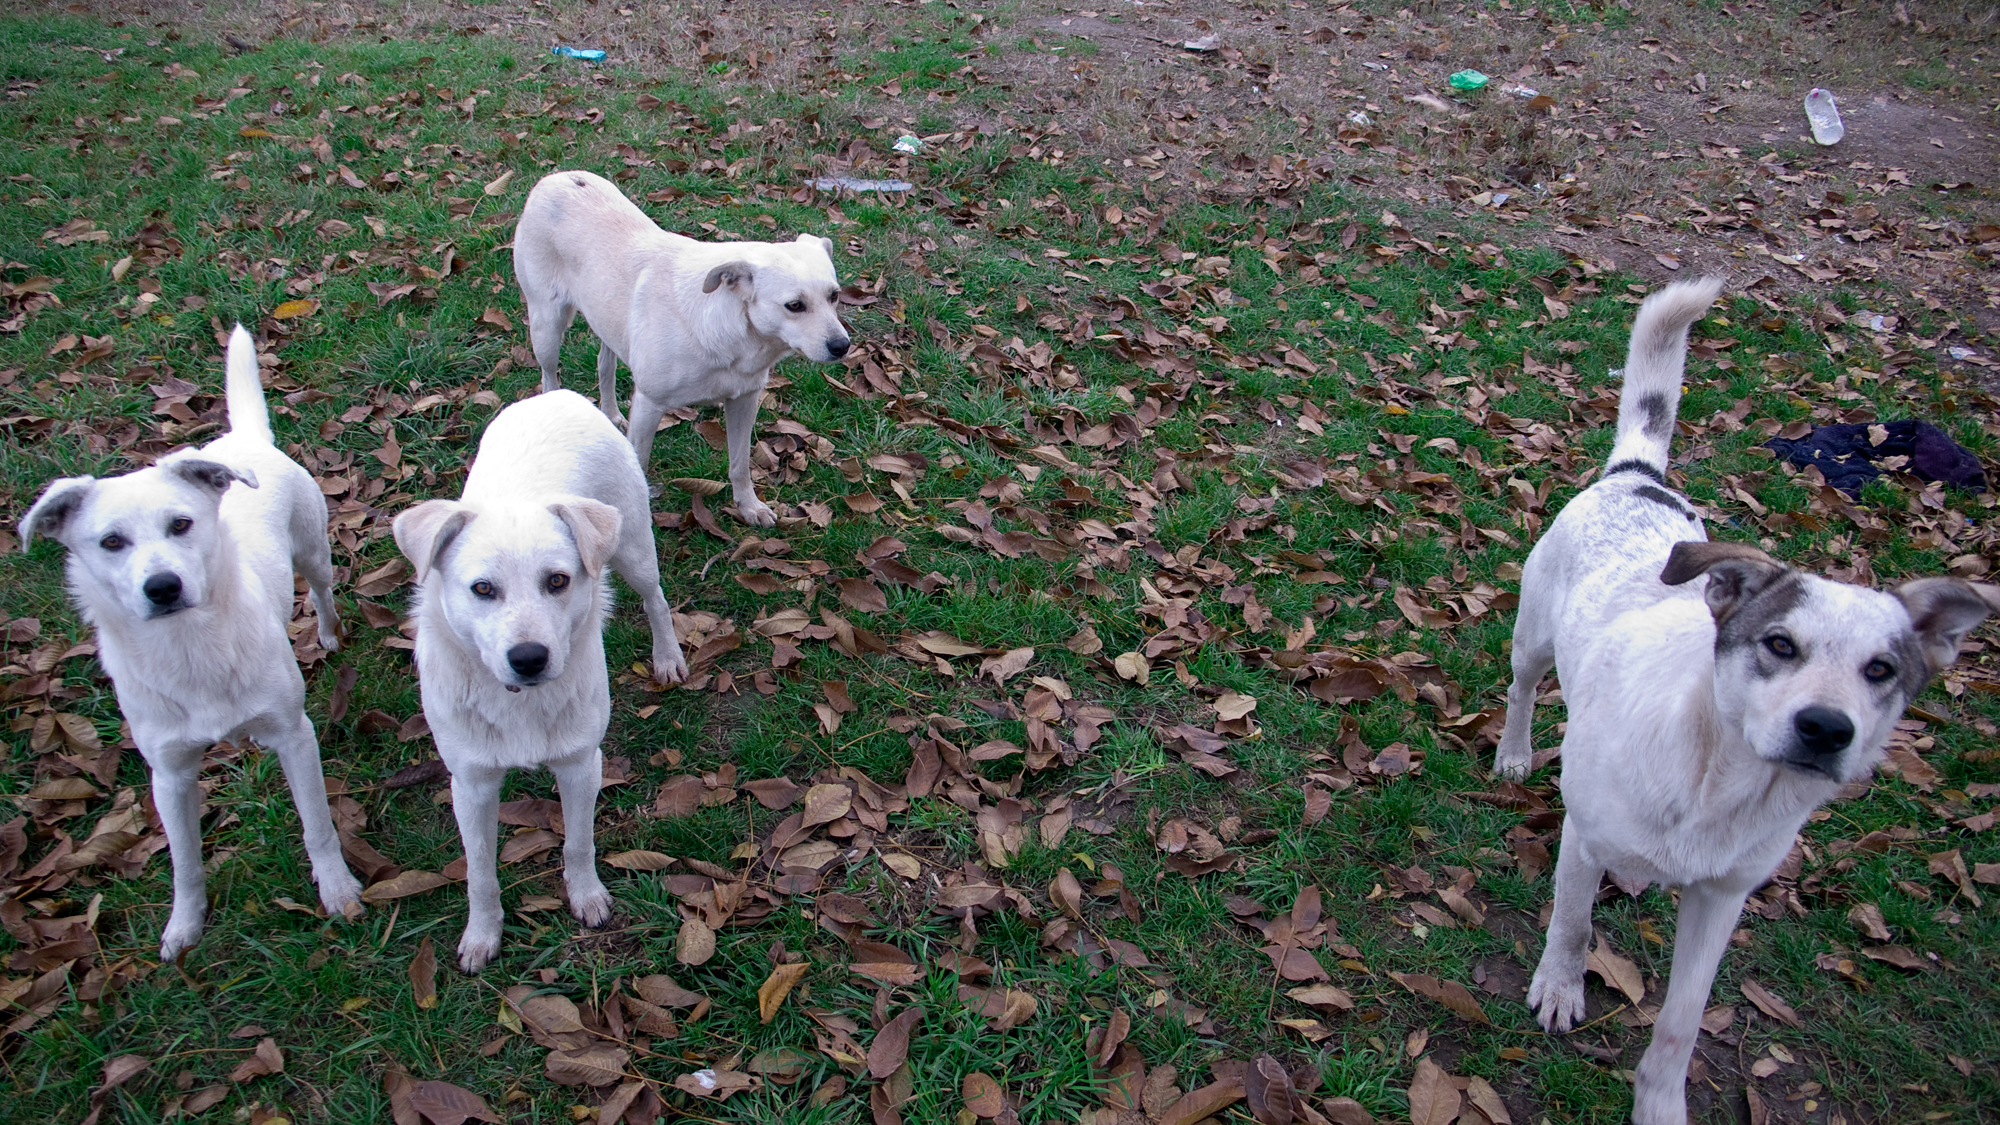 a group of dogs, most of which look like yellow labradors